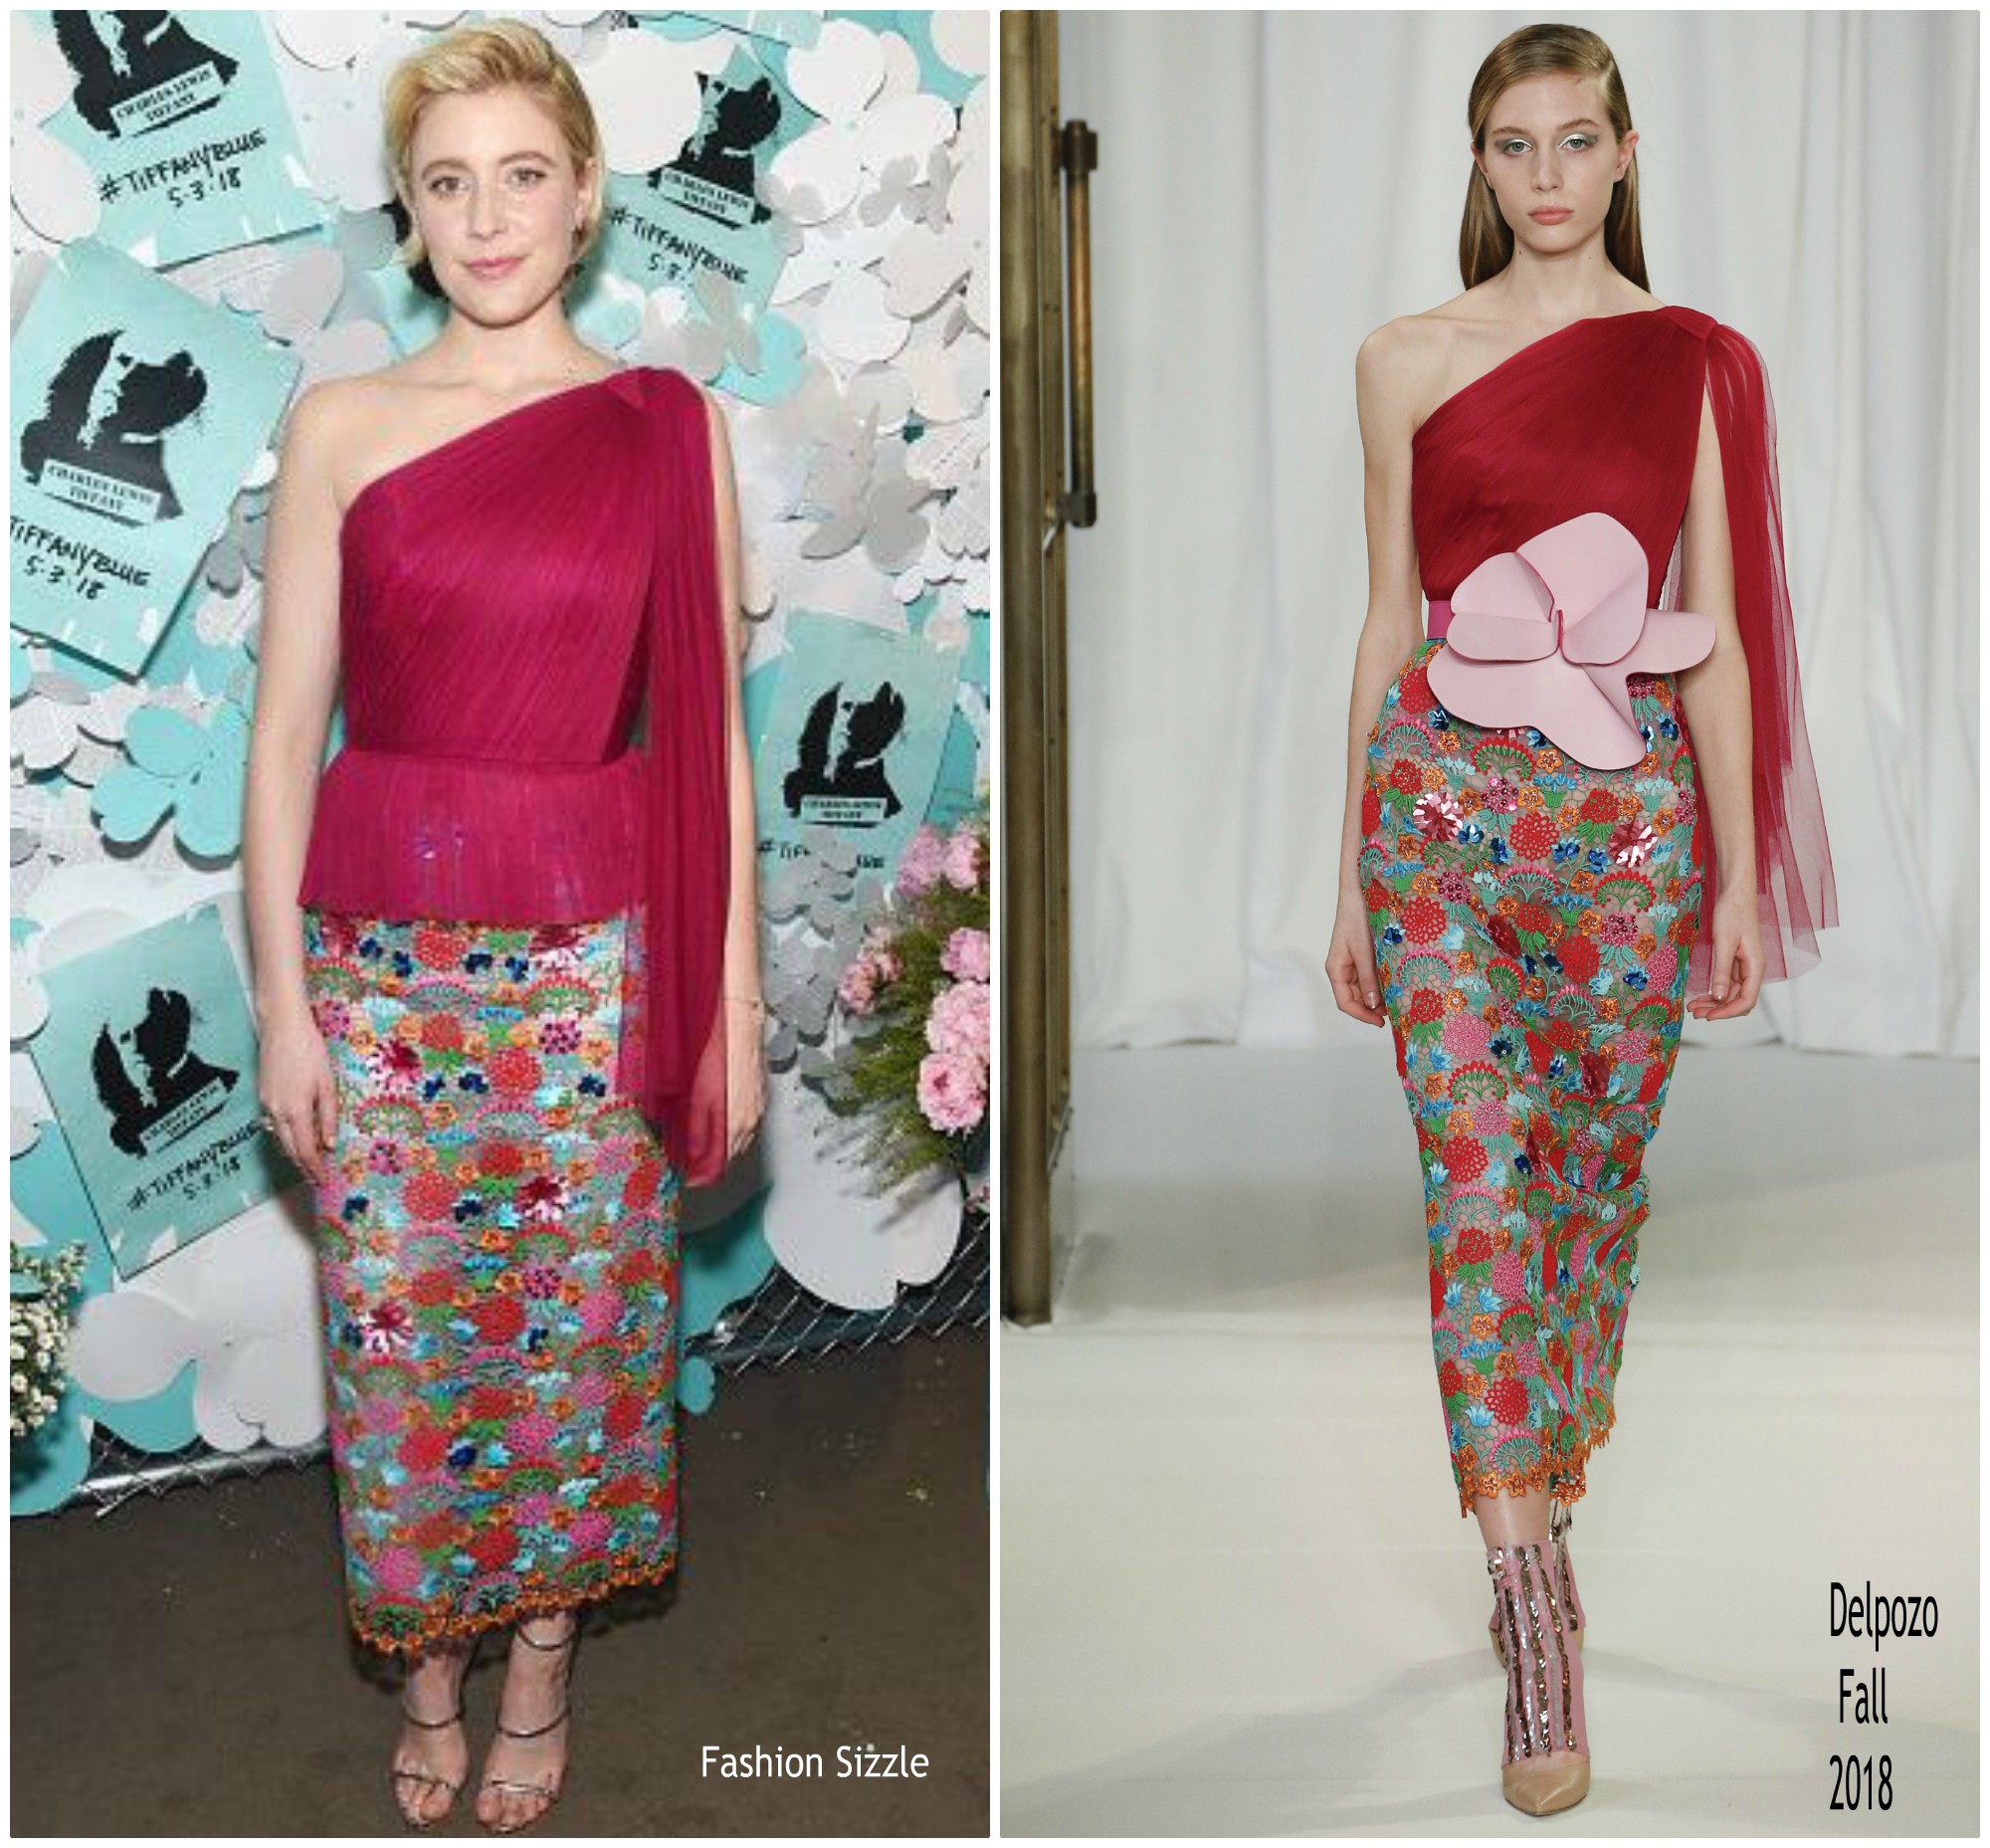 greta-gerwig-in-delpozo-tiffany-co-paper-flowers-event-and-believe-in-dreams-campaign-launch